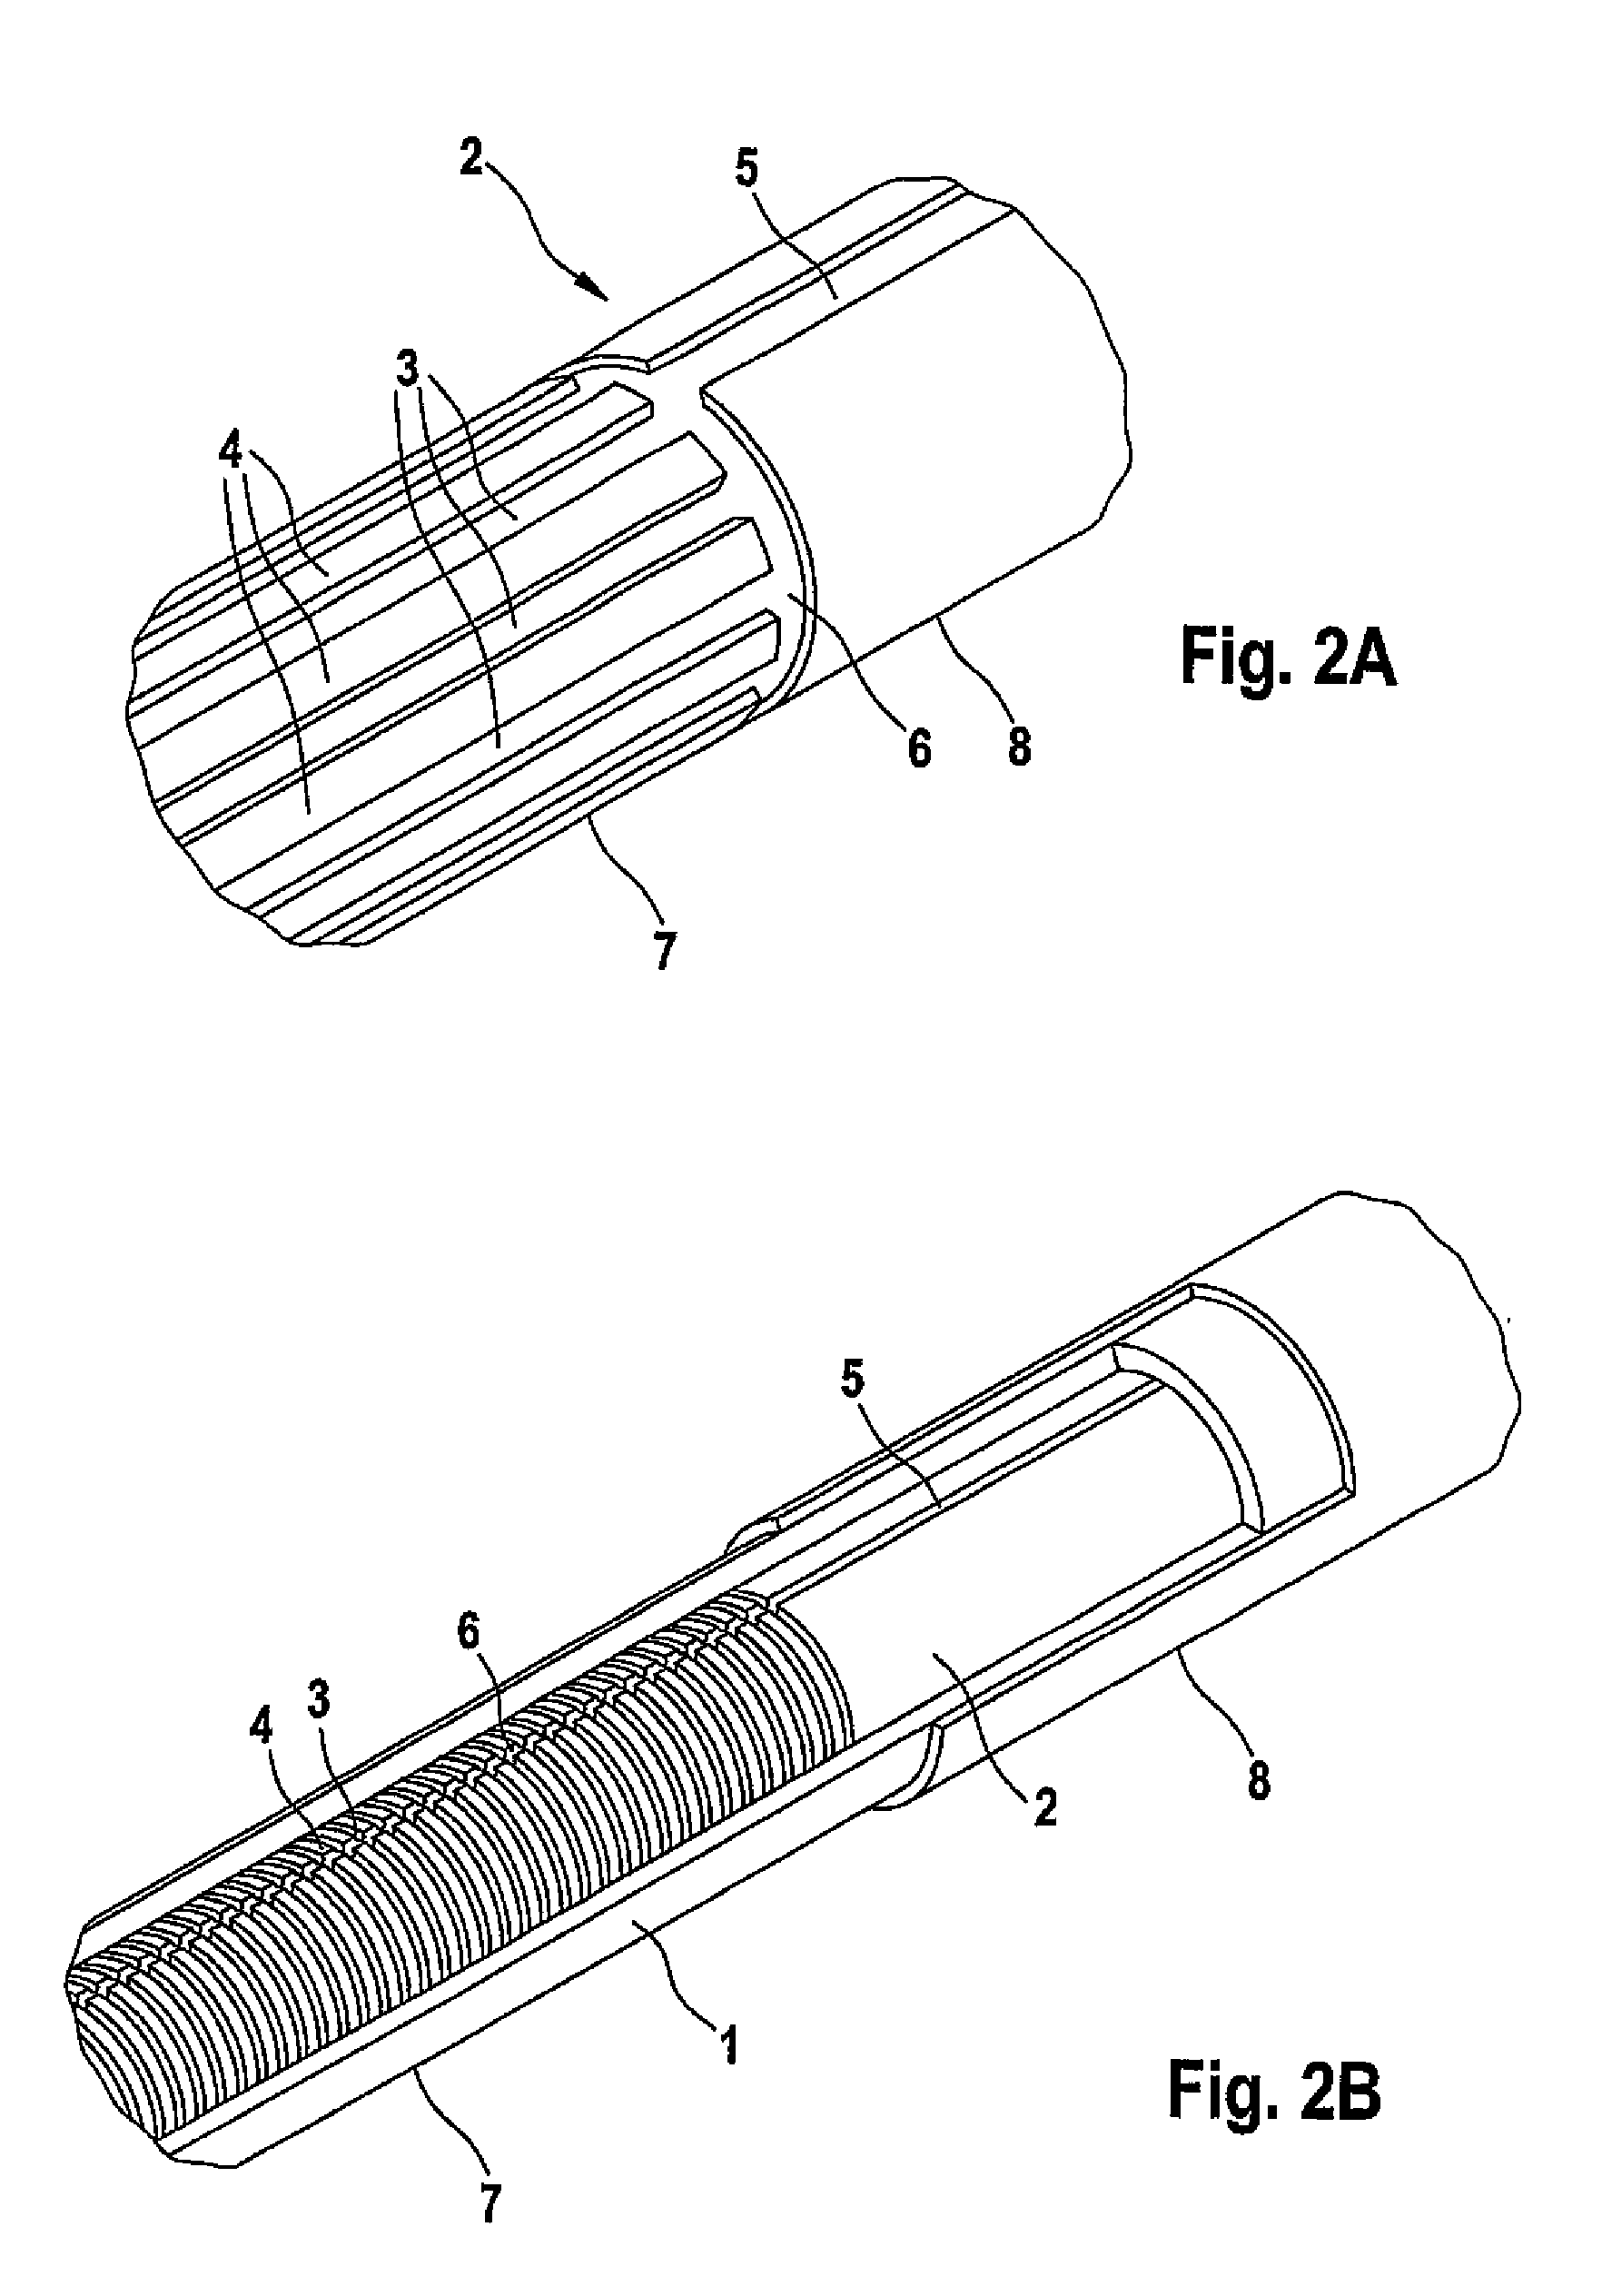 Catheter With Microchannels For Monitoring The Concentration Of An Analyte In A Bodily Fluid